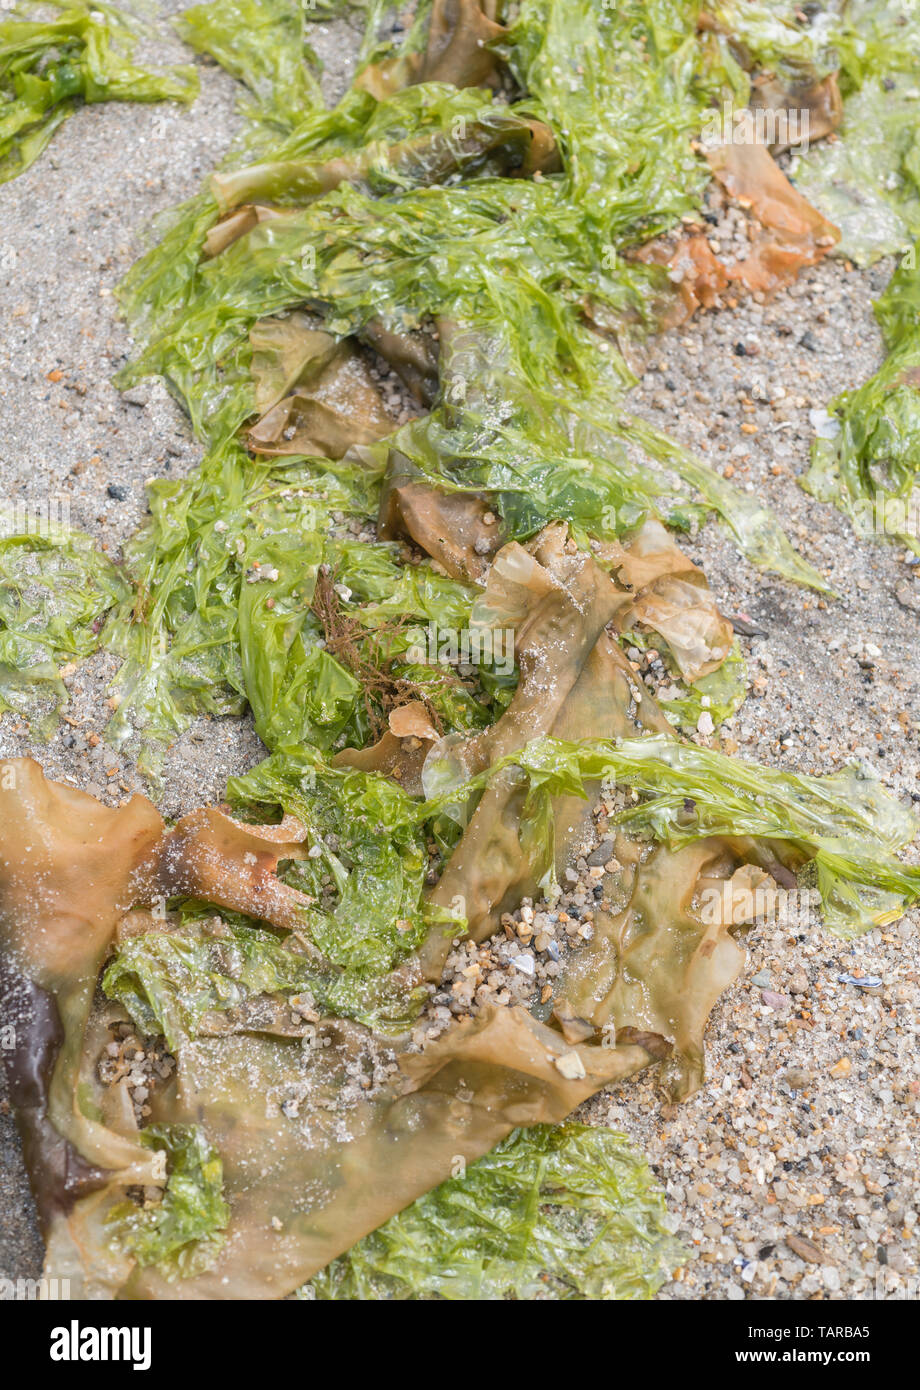 Close-up of the green seaweed Sea Lettuce / Ulva lactuca washed ashore on beach & deposited at the drift line / tideline. Fresh Sea Lettuce edible. Stock Photo